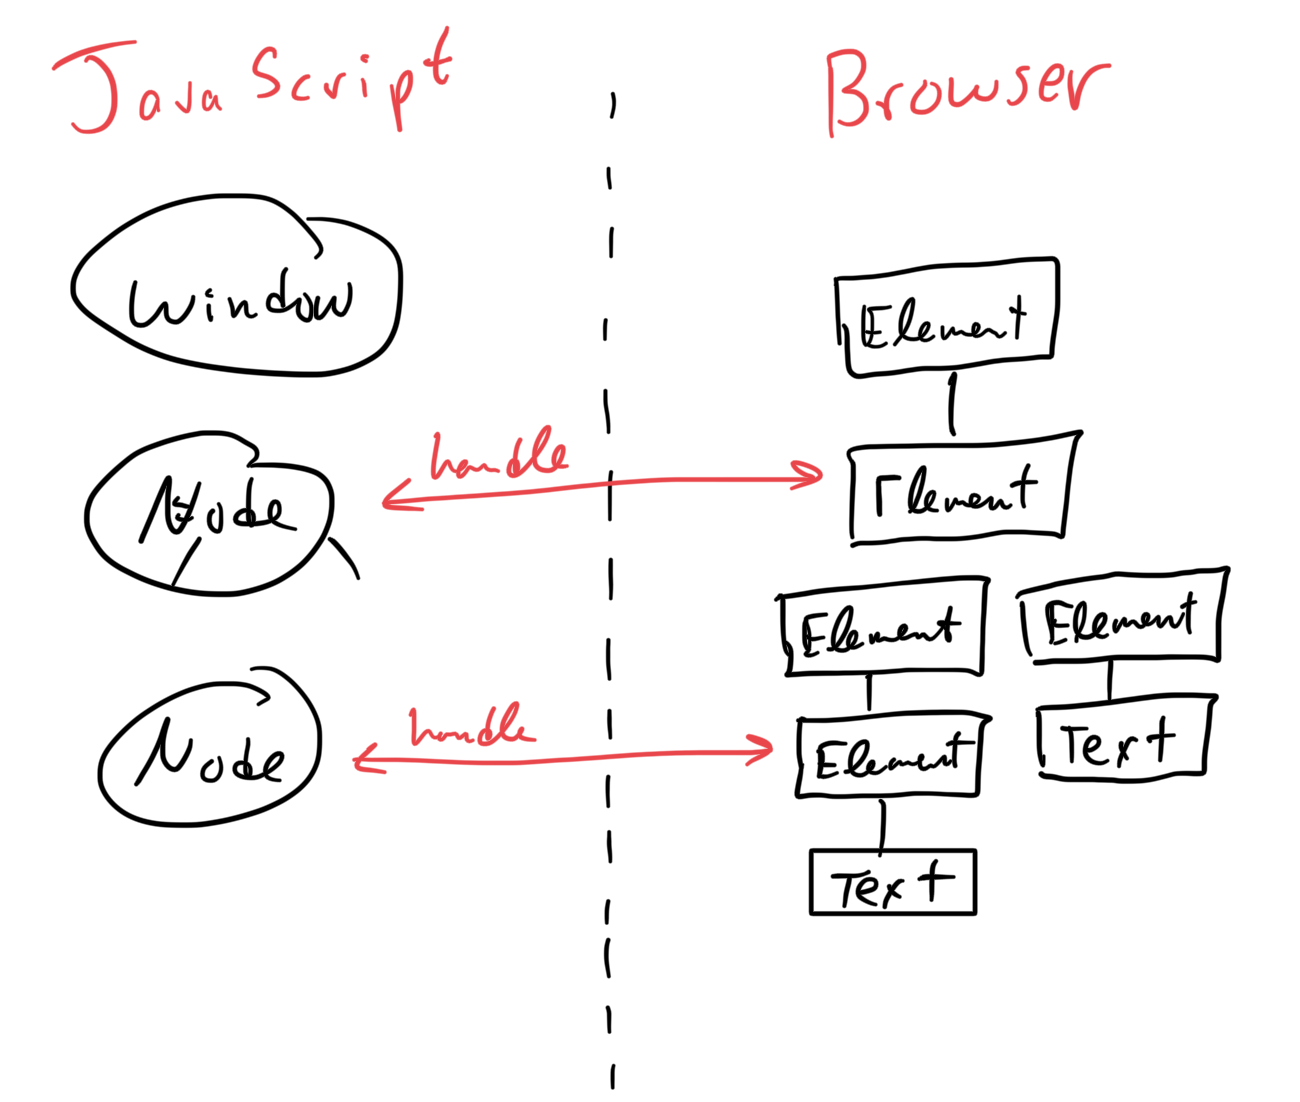 Figure 2: The relationship between Node objects in JavaScript and Element/Text objects in the browser is maintained through handles